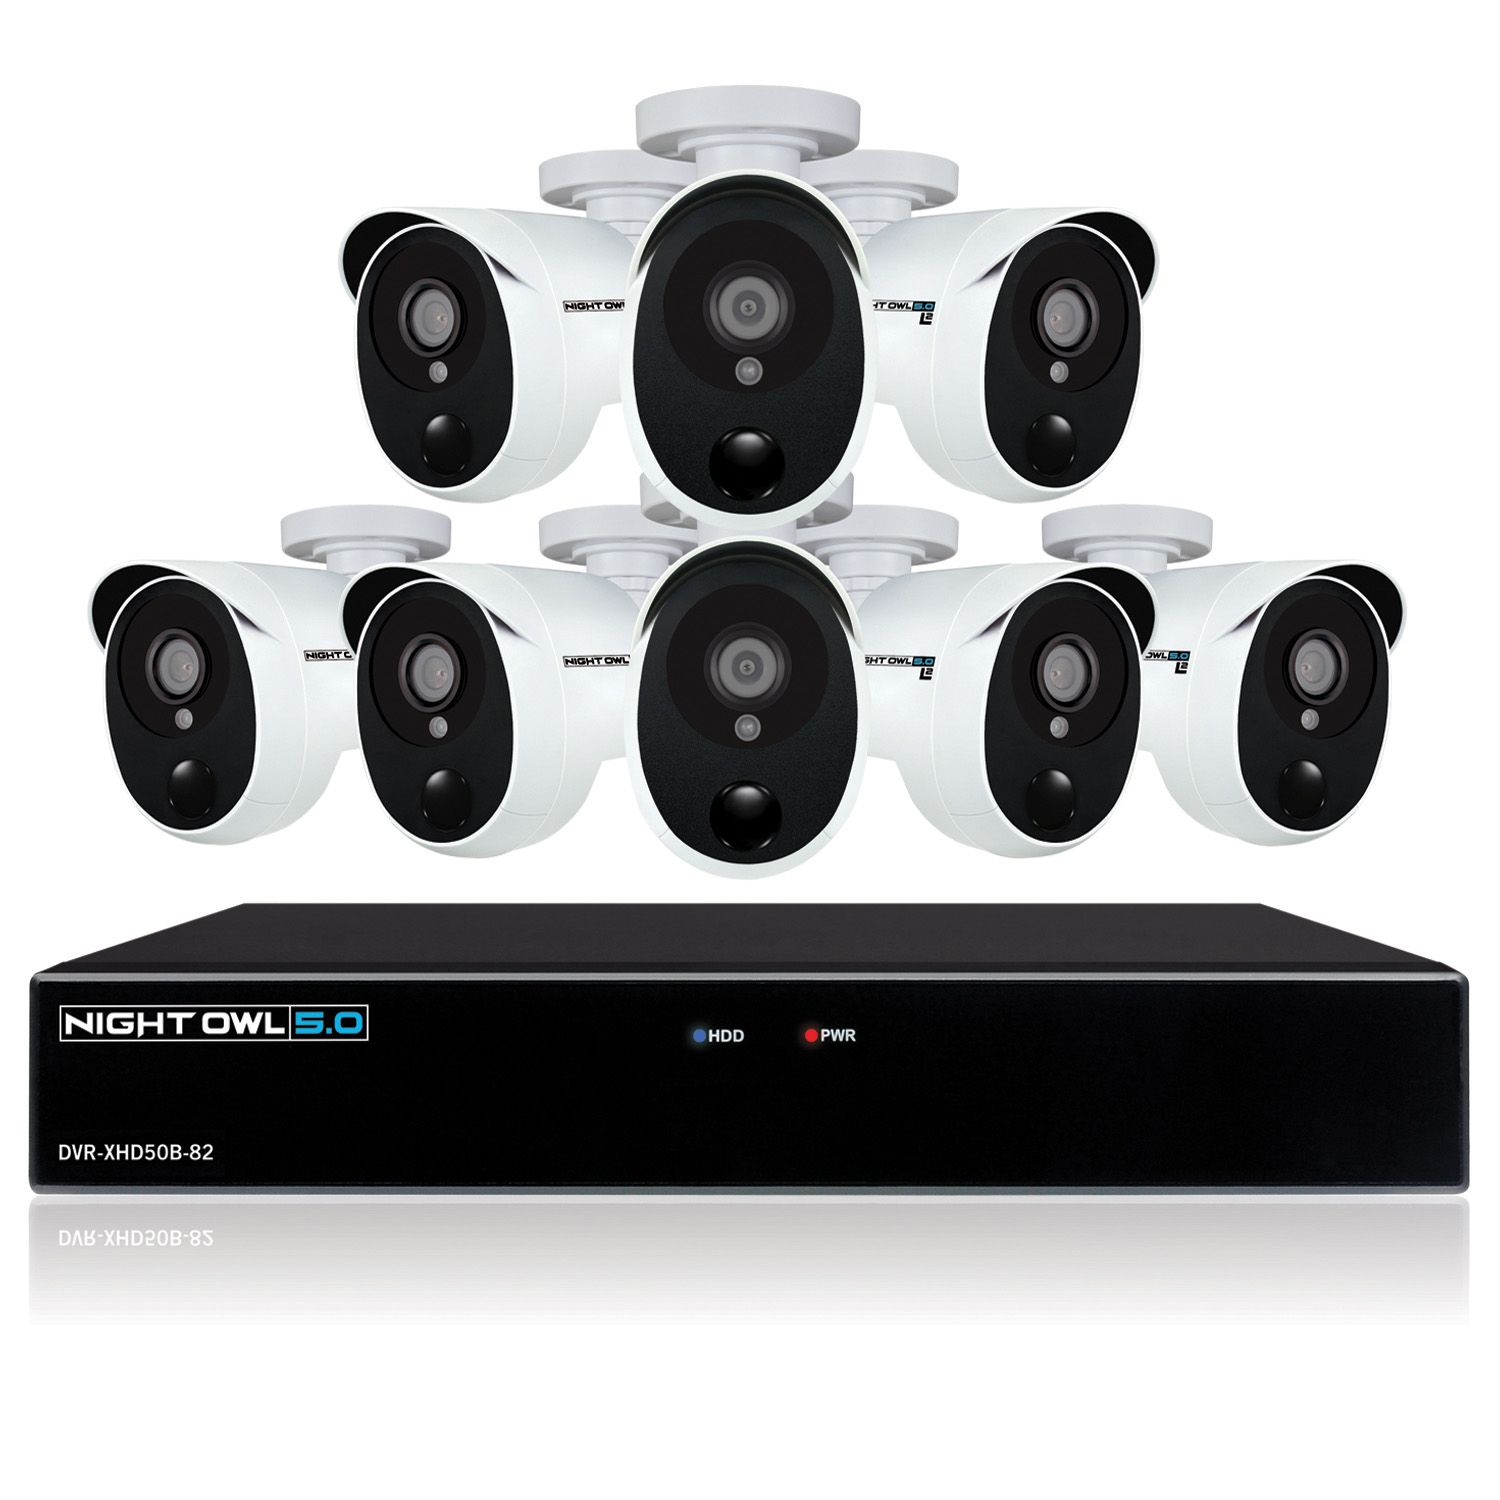 Night Owl CL-X5P-882 8-Channel 5MP DVR Surveillance System with 2TB HDD, 8-Camera 5MP Indoor/Outdoor Cameras